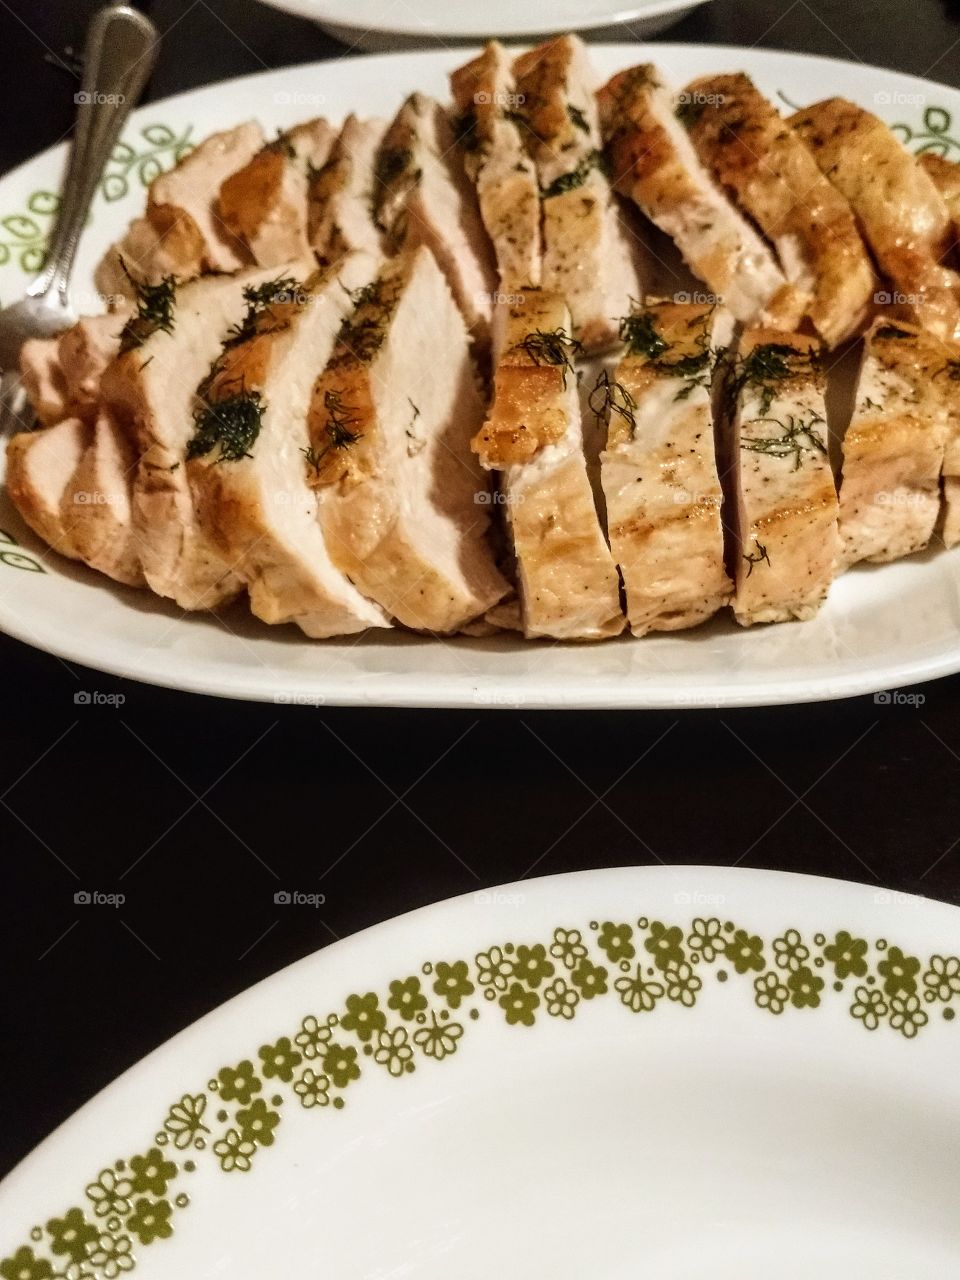 platter of sliced roast turkey breast with dill for holiday meal Thanksgiving or Christmas